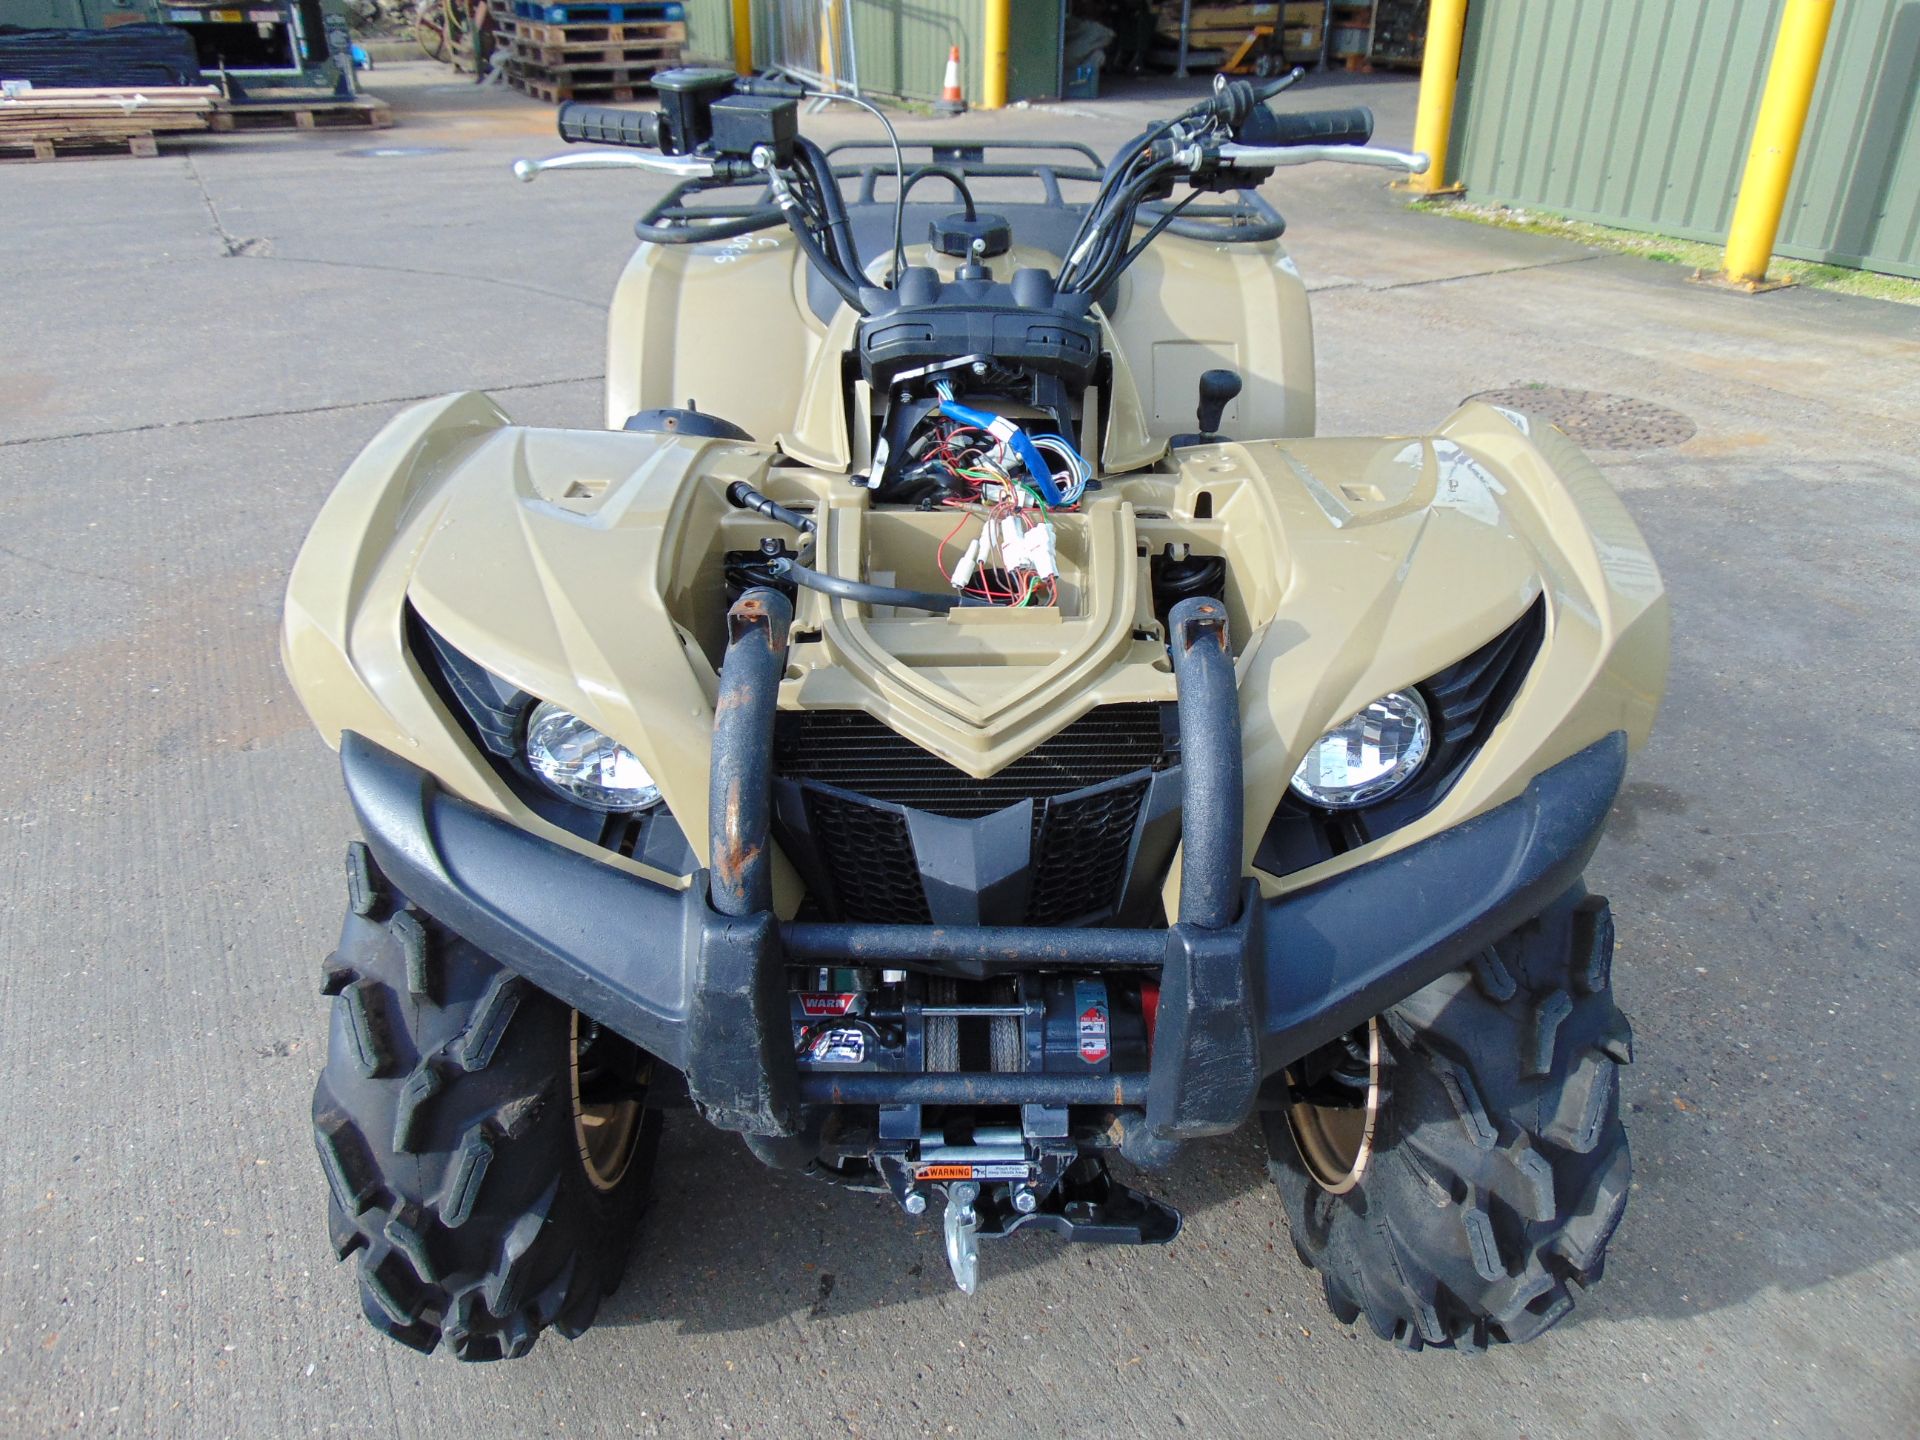 Military Specification Yamaha Grizzly 450 4 x 4 ATV Quad Bike ONLY 75 miles!!! - Image 3 of 24